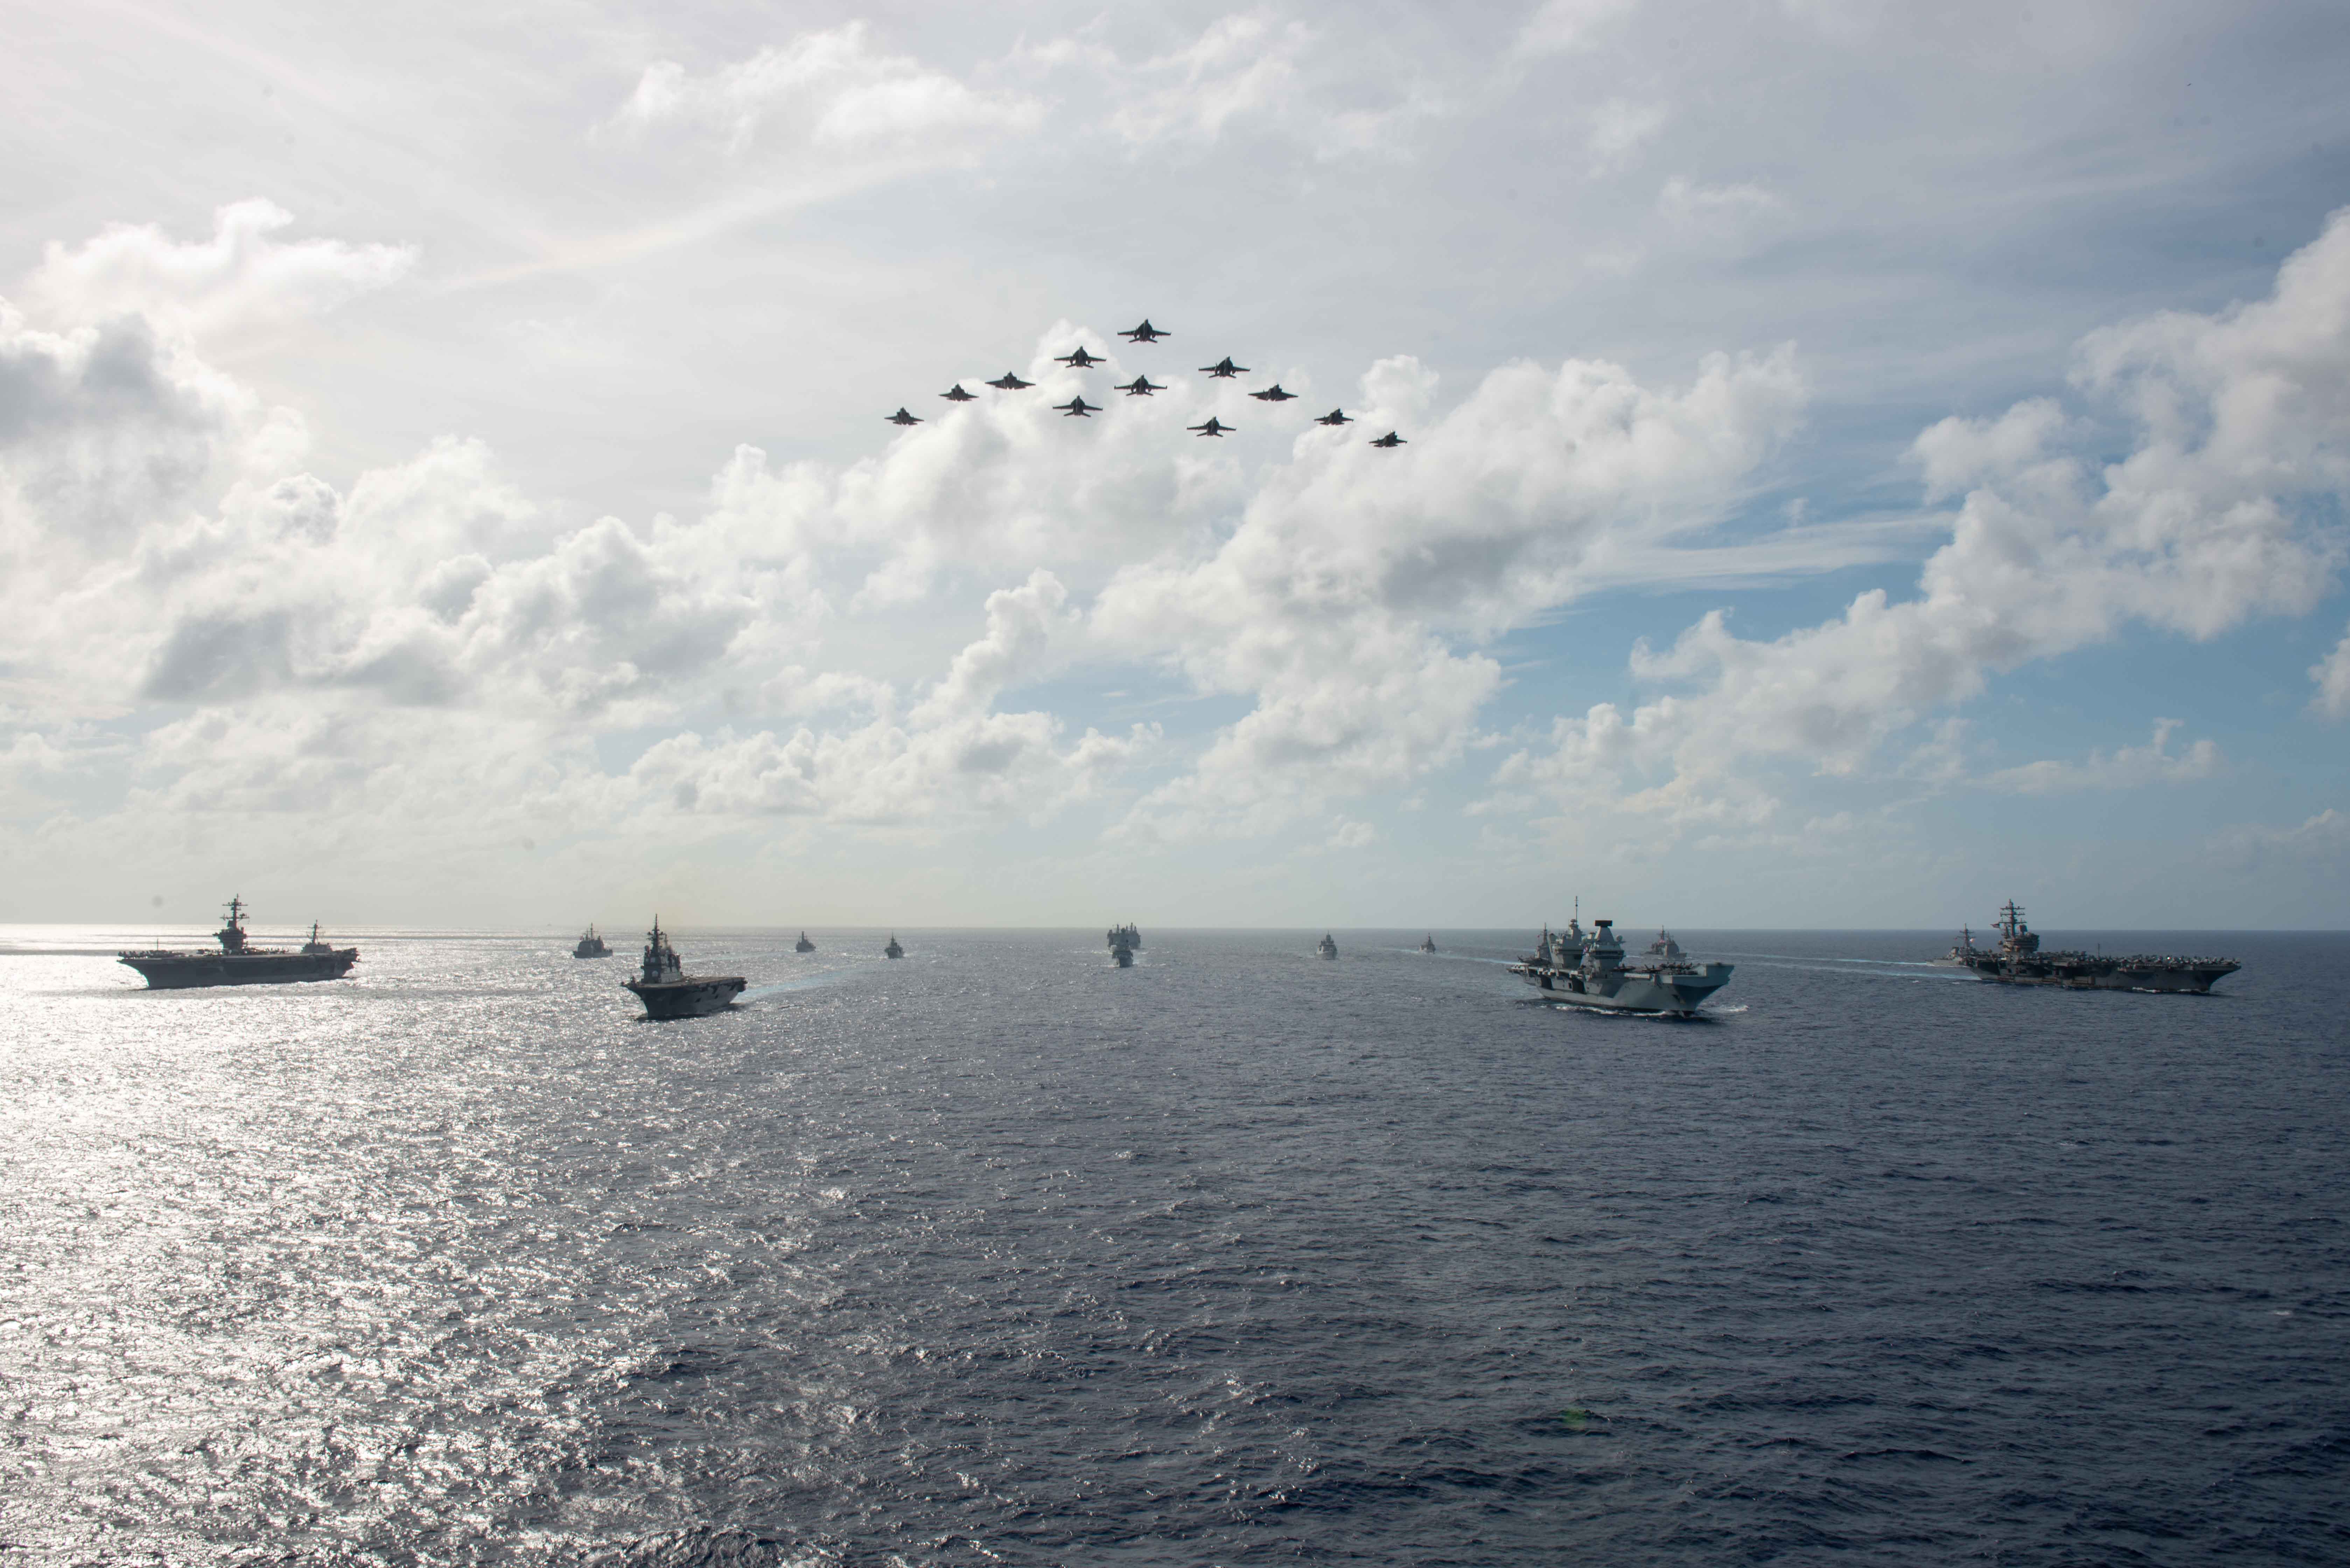 Two F-35B Lightnings fly in formation over Aircraft carriers.